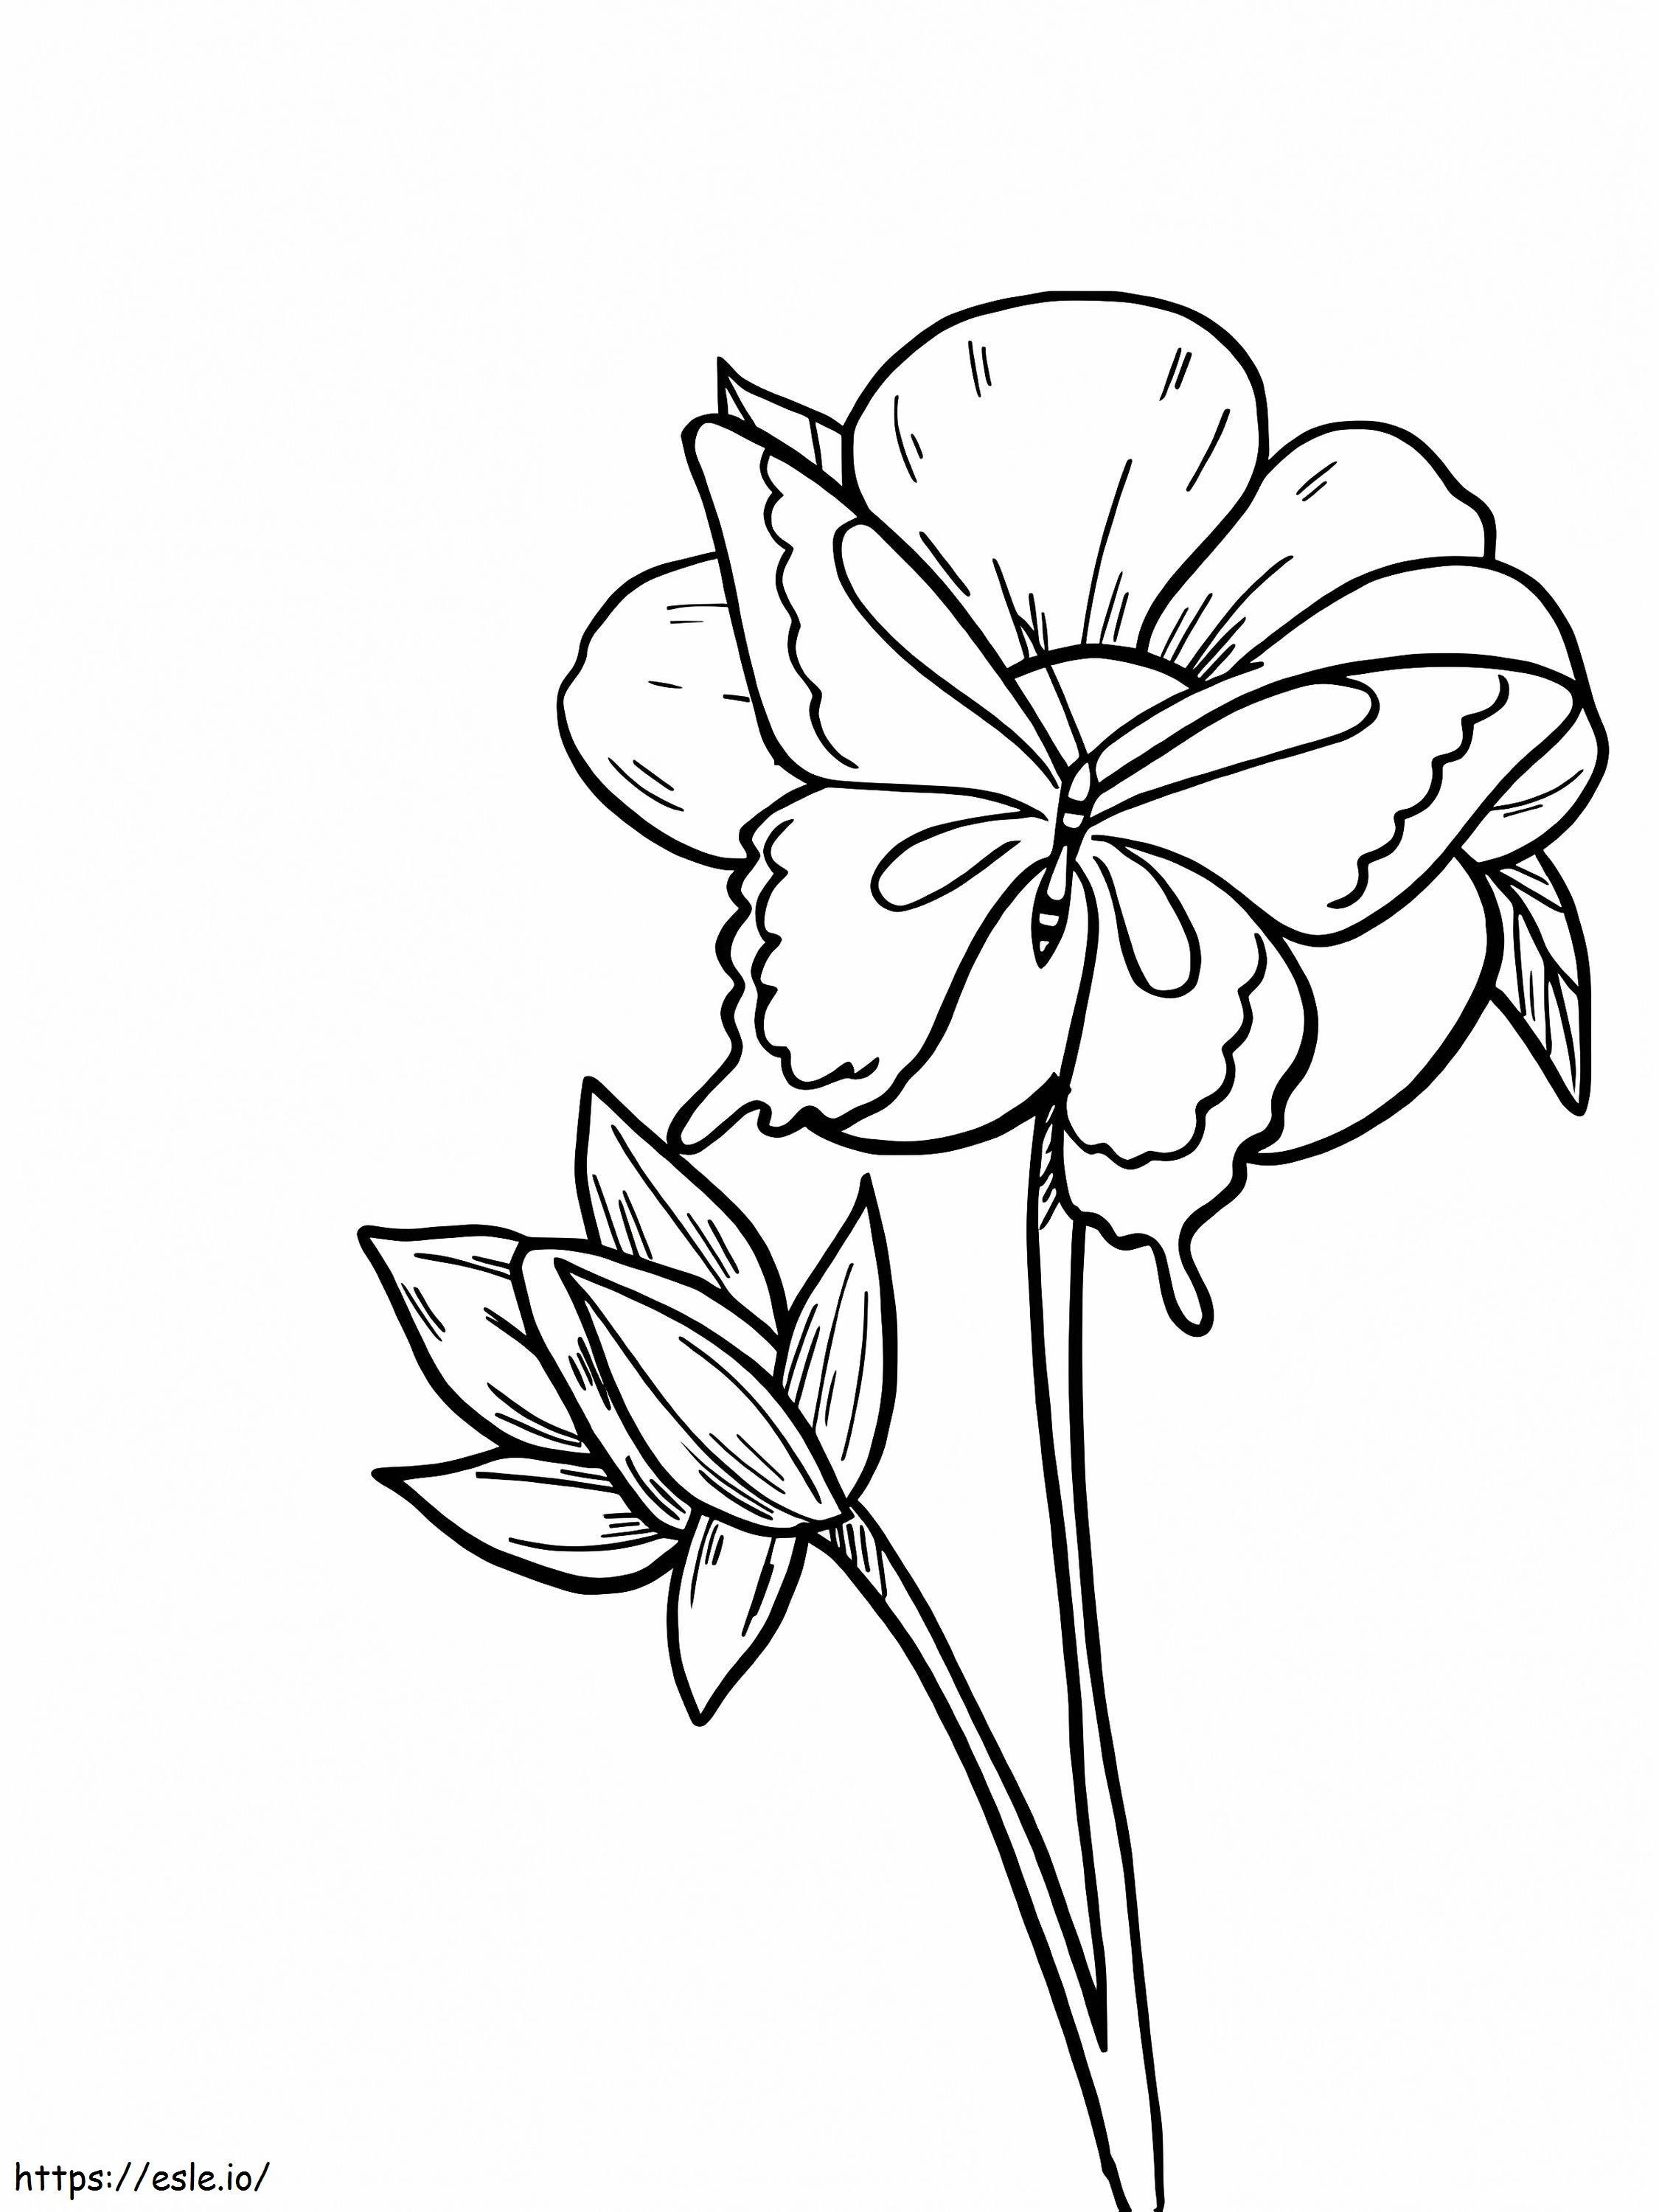 Butterfly On Crocus Flower coloring page